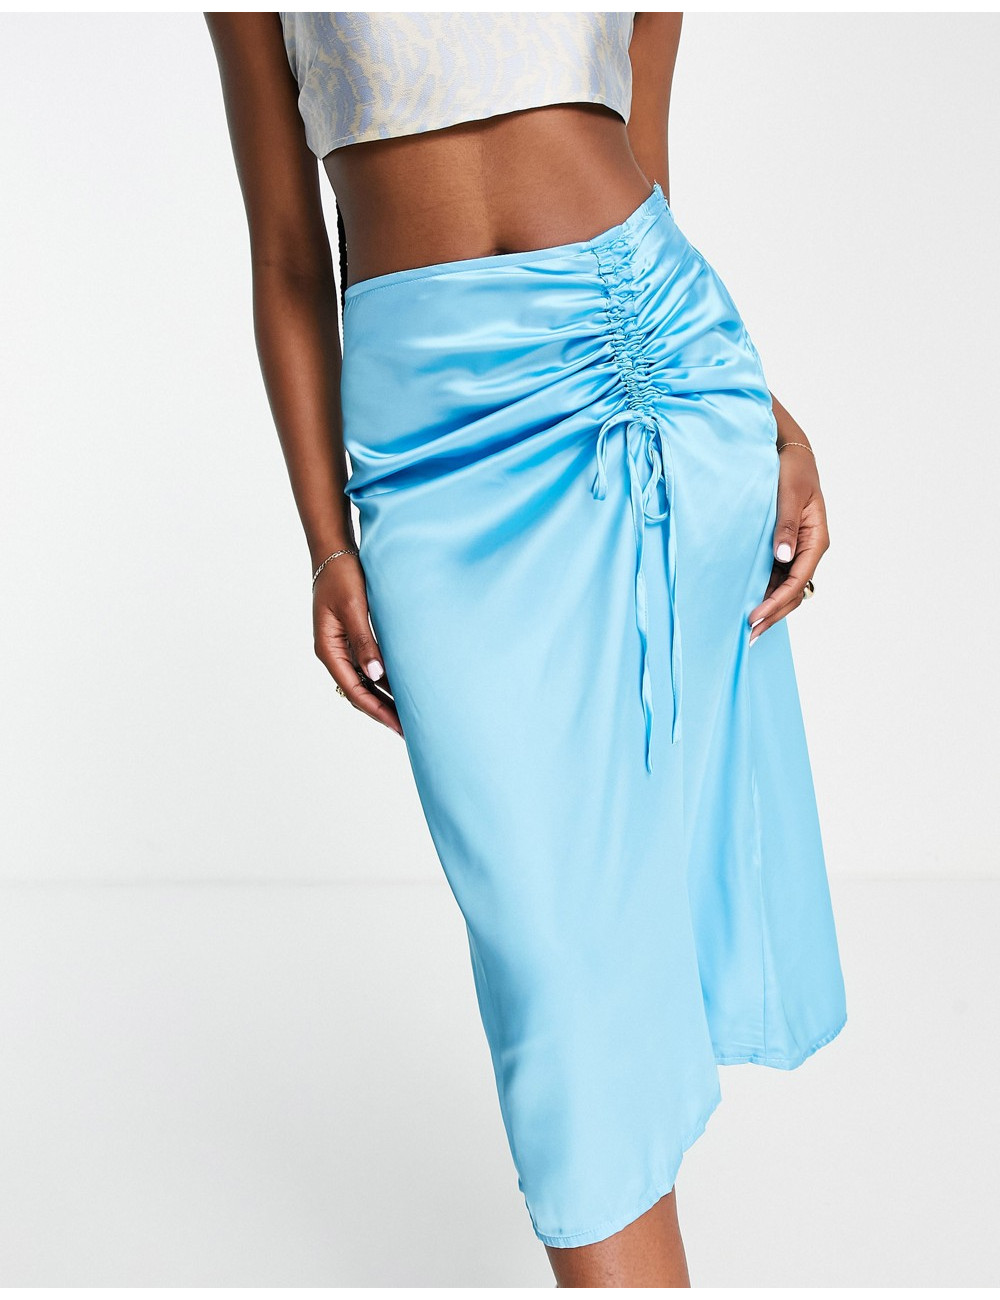 Missguided co-ord satin tie...